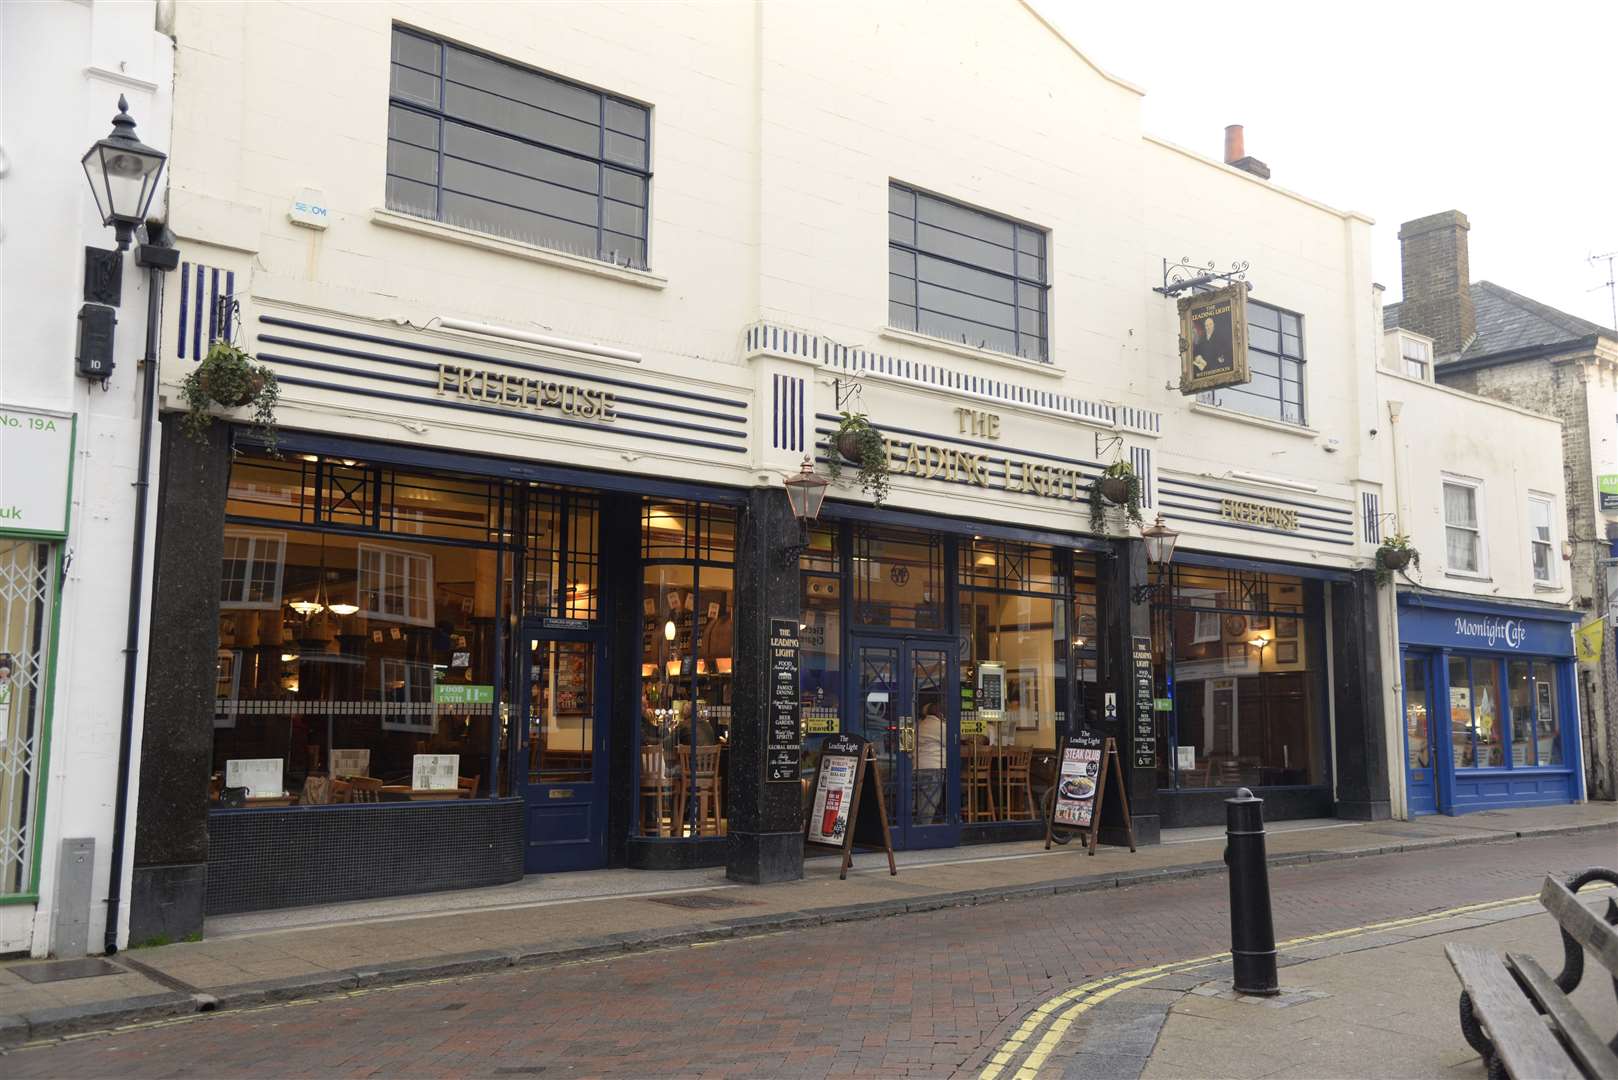 Like so many Wetherspoon pubs, The Leading Light sits in the centre of town in a carefully restored old building – in this case you get two for the price of one, a butchers and a furniture store